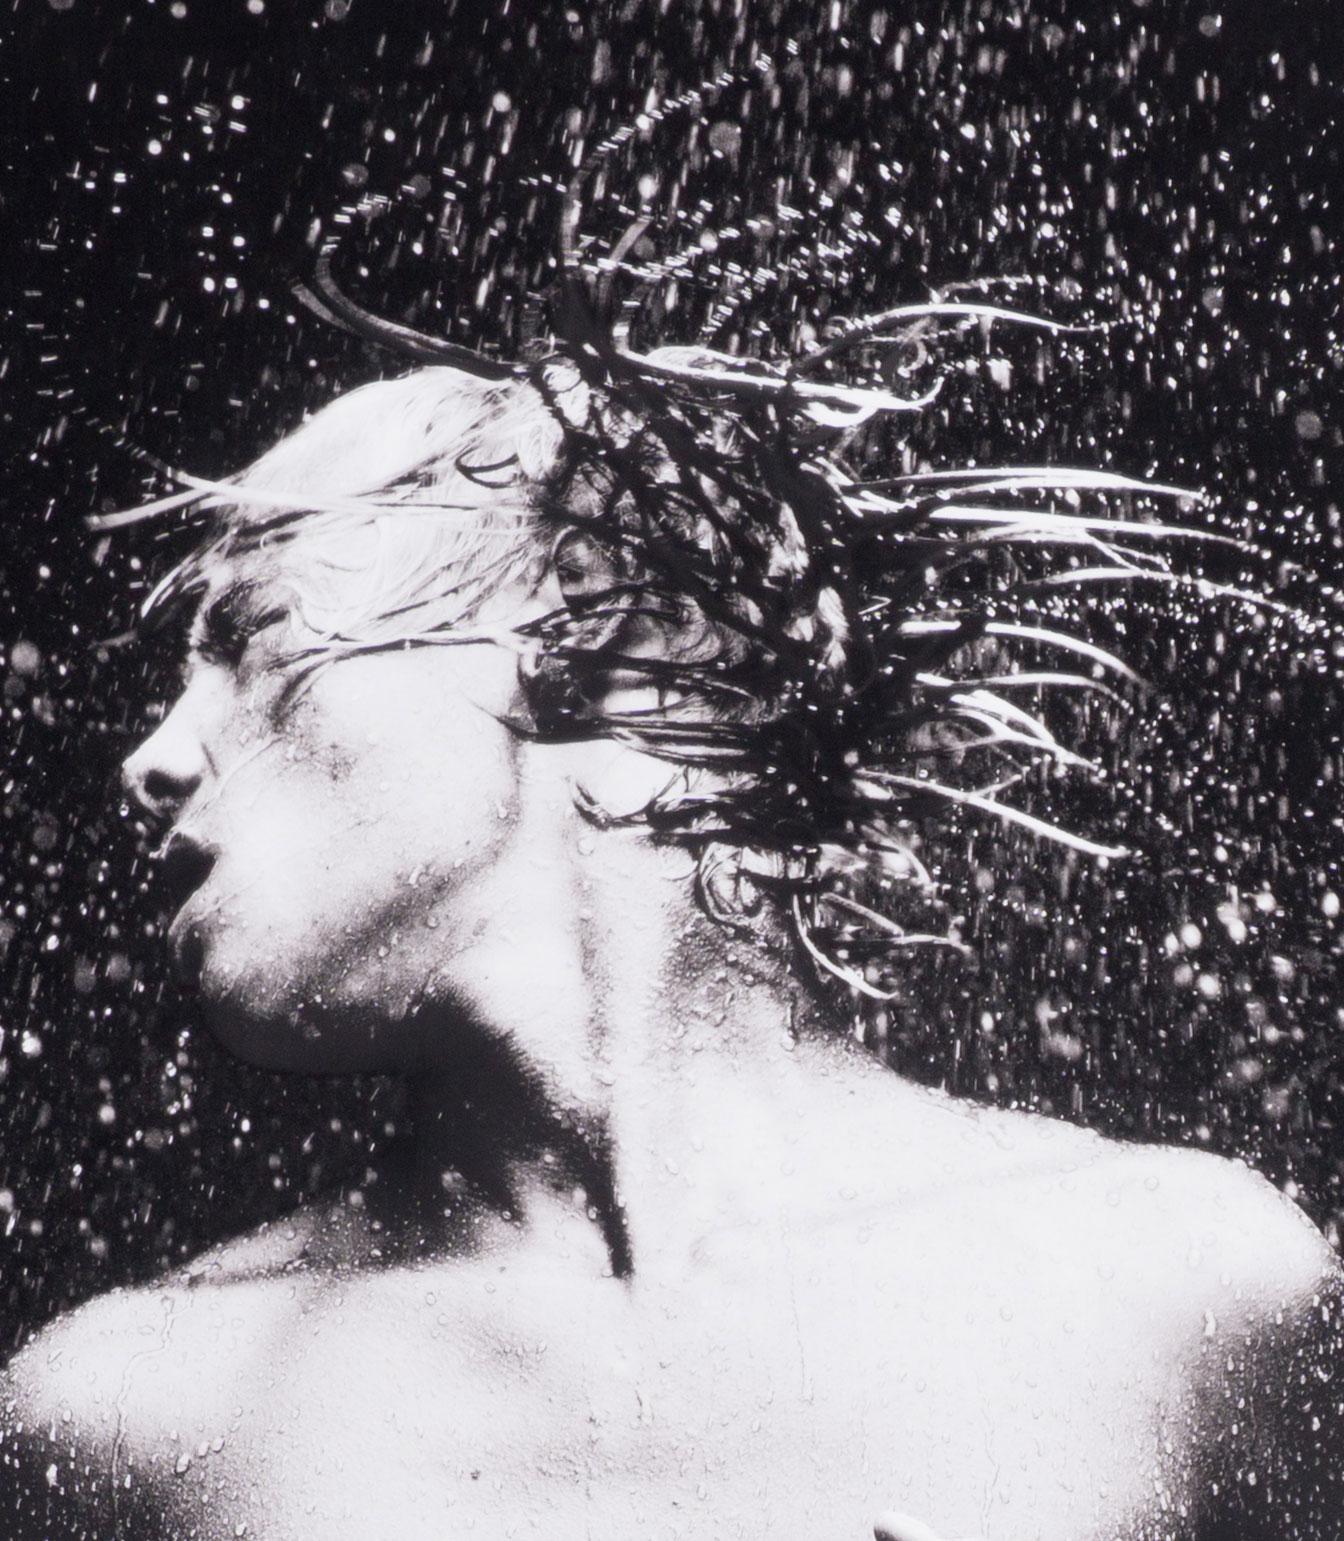 WET 13 (nude Dutch boy sends beads of water flying from his long mane of hair)   - Photograph by Benno Thoma